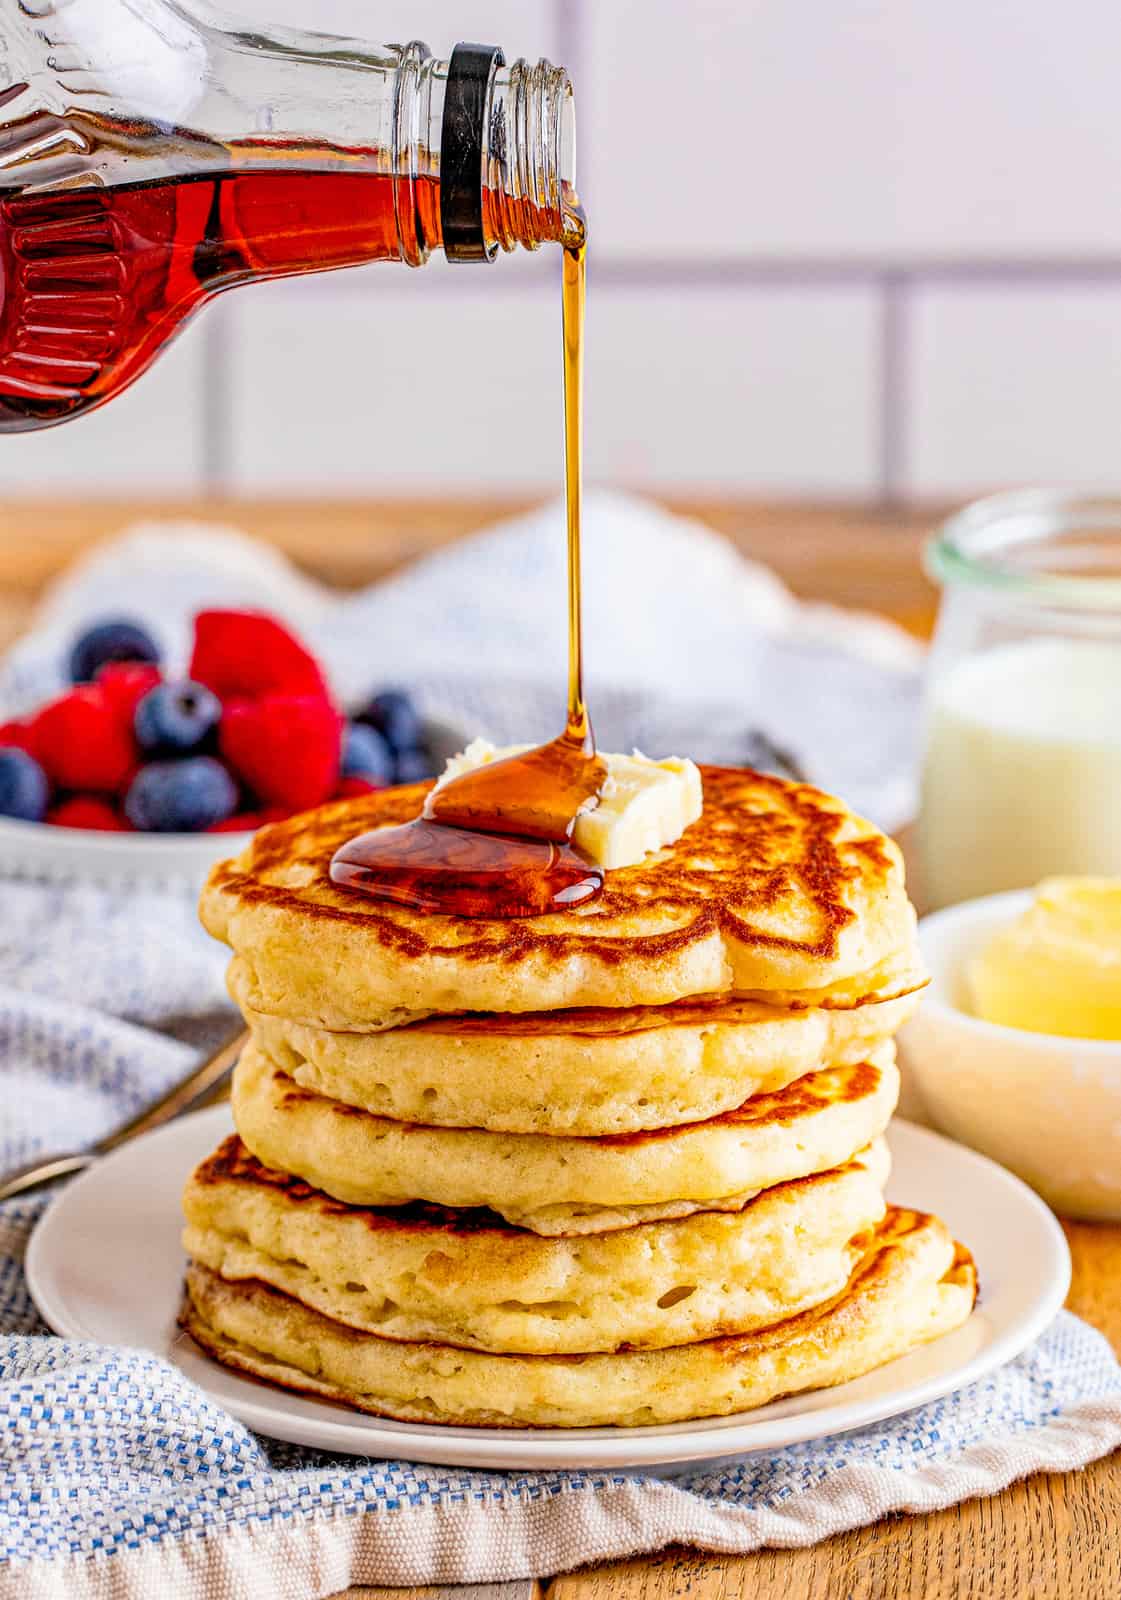 Syrup being drizzled over stack of the Buttermilk Pancake Recipe.